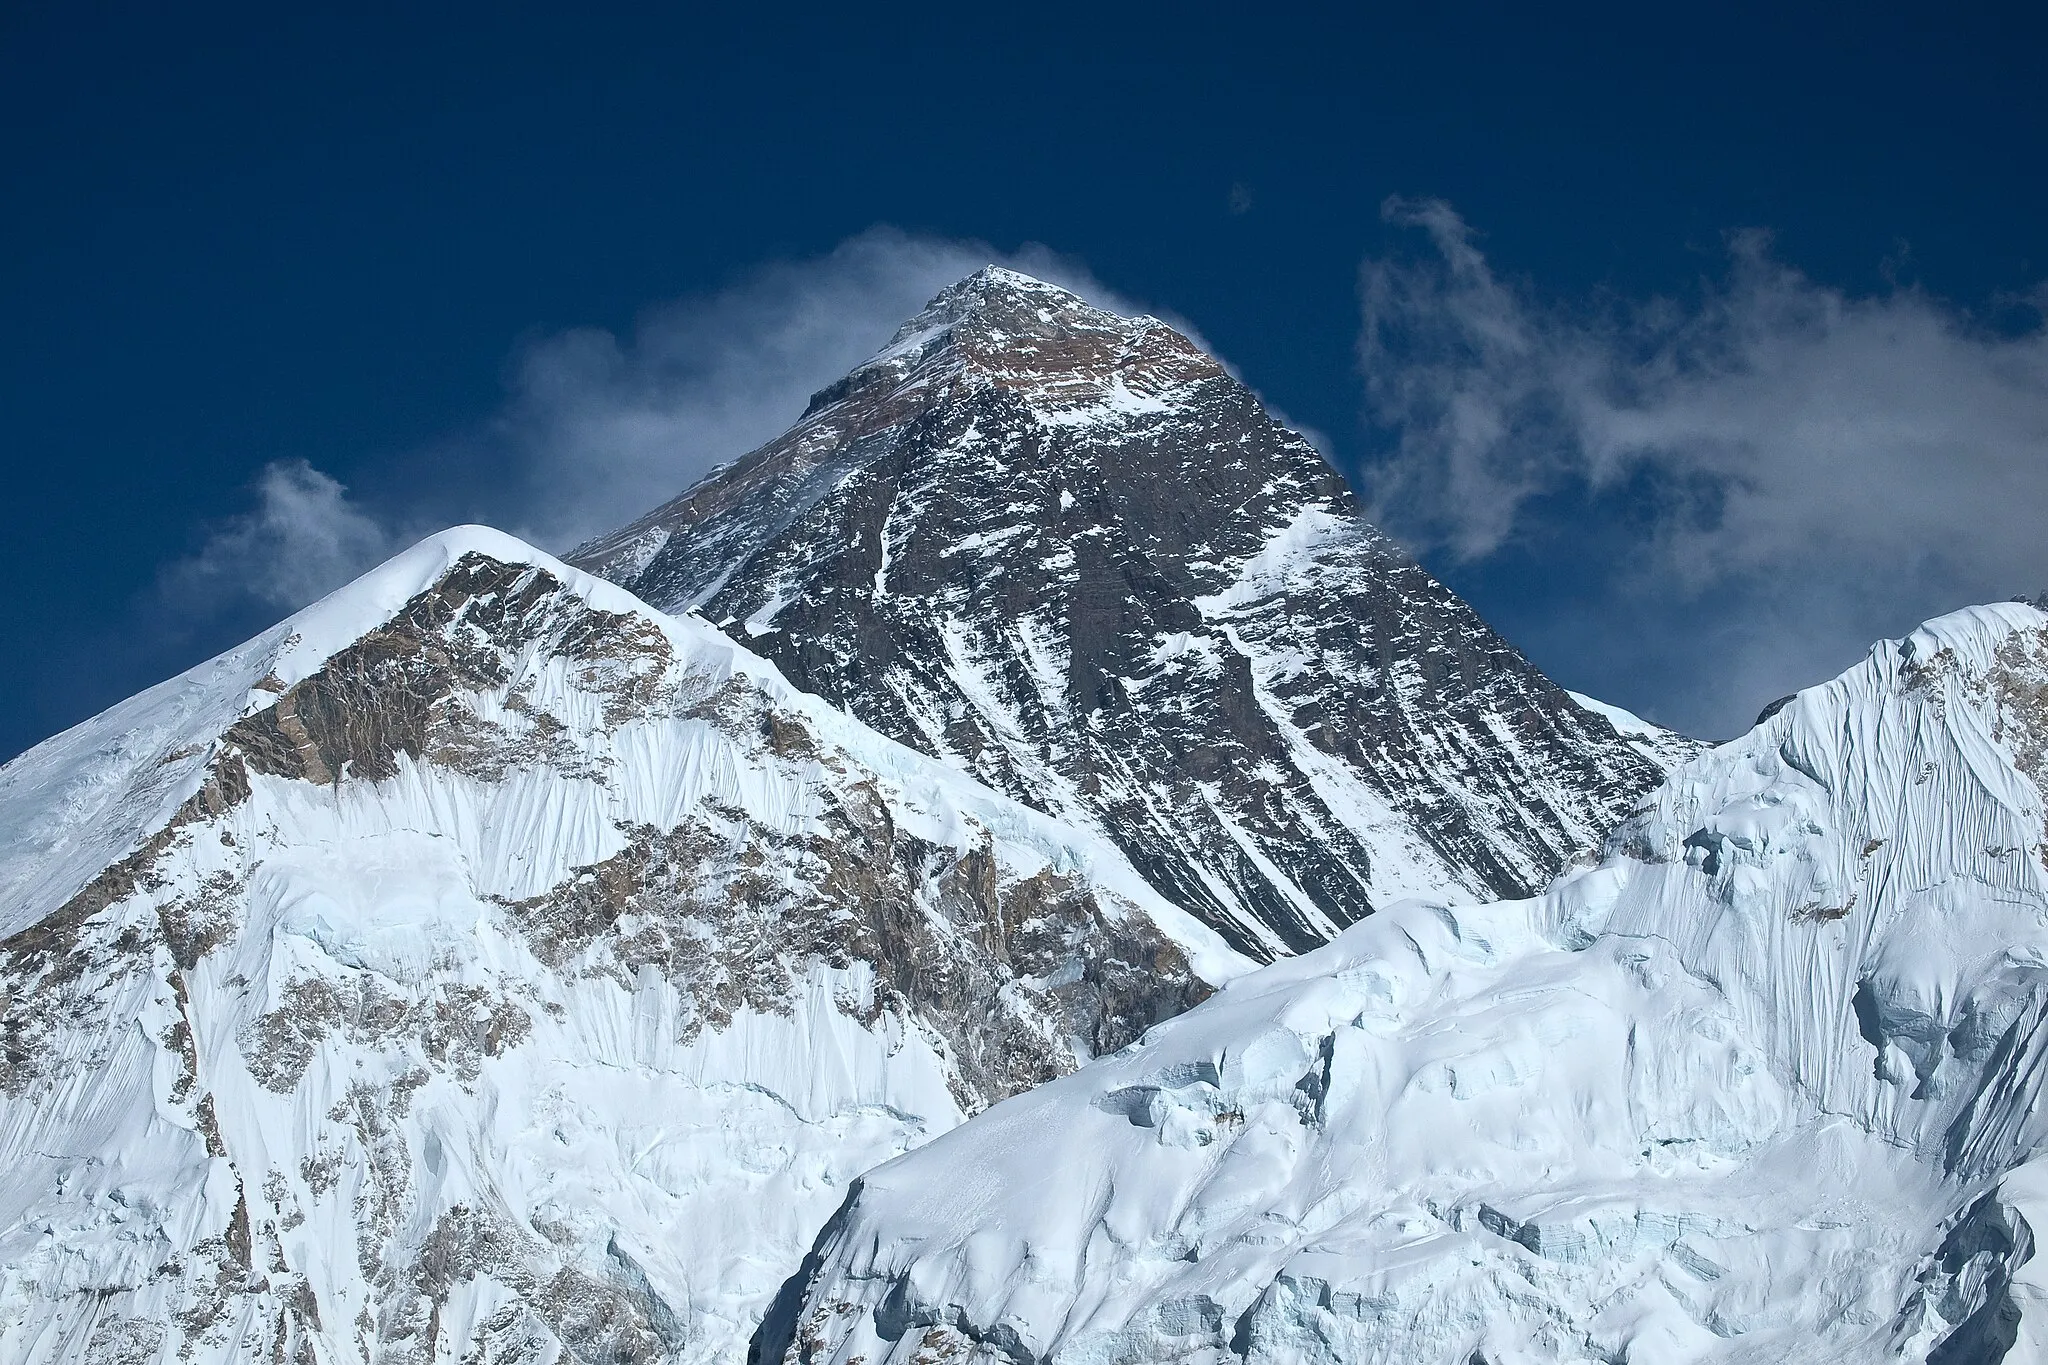 Photo showing: Mount Everest, the highest mountain in the world. Mount Everest, Nepal, Himalayas.